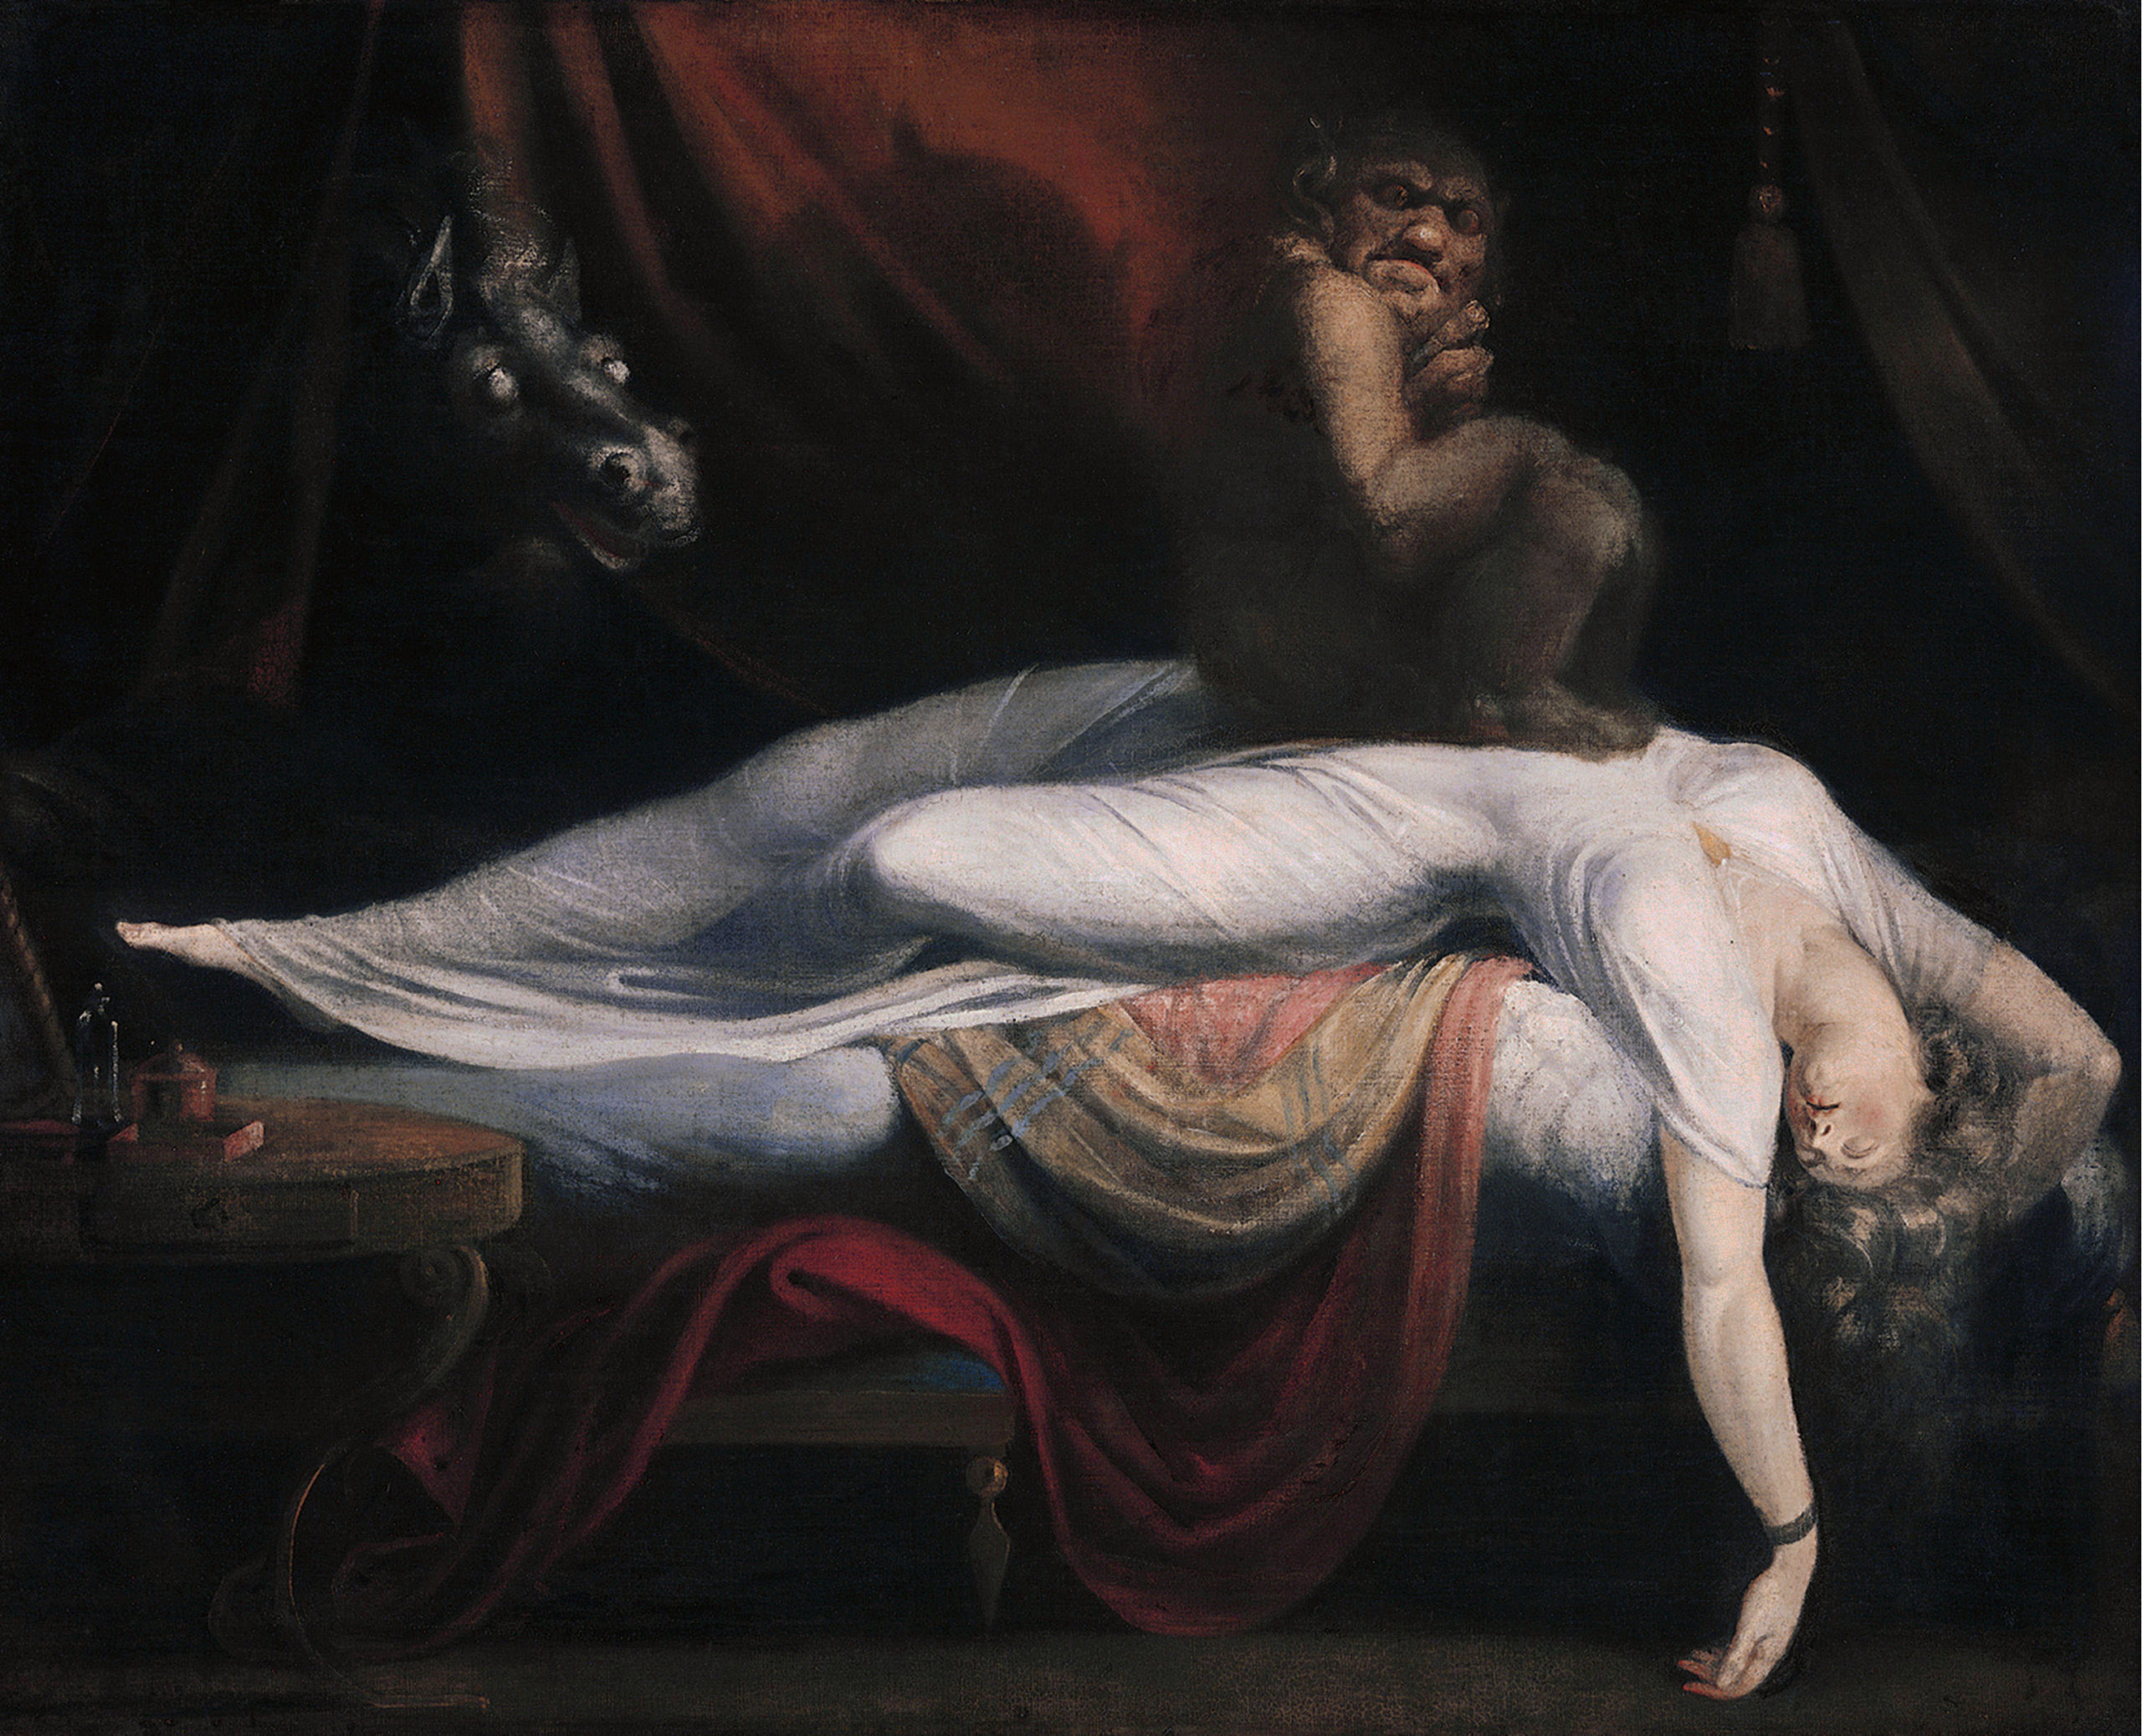 The Nightmare by Henry Fuseli (article) Khan Academy